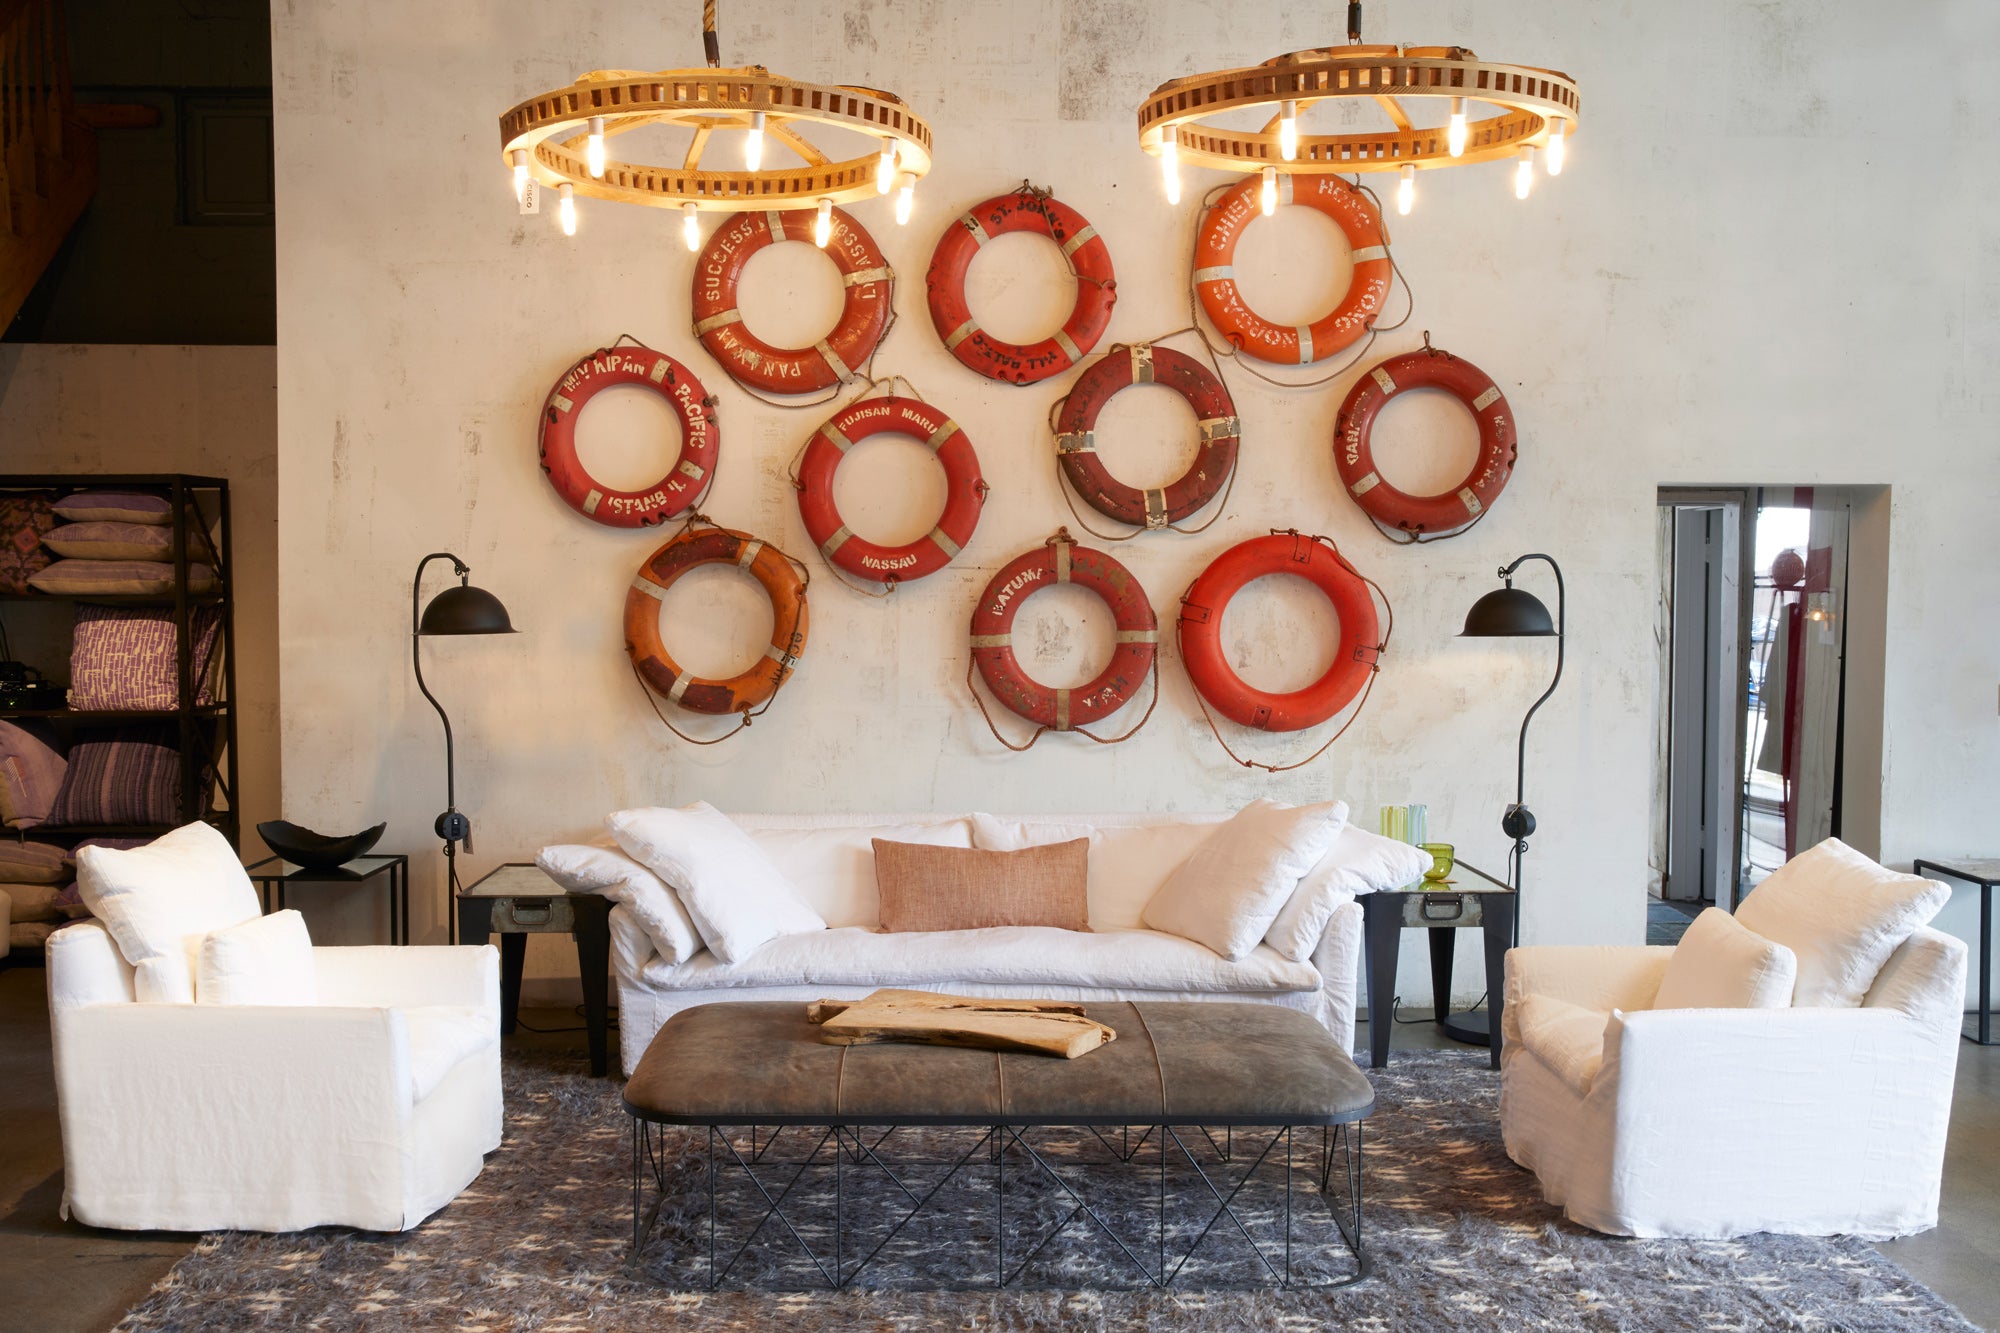  interior shot of Cisco Home store with white sofa and matching white chairs and wall of life preservers mounted as art on the wall 